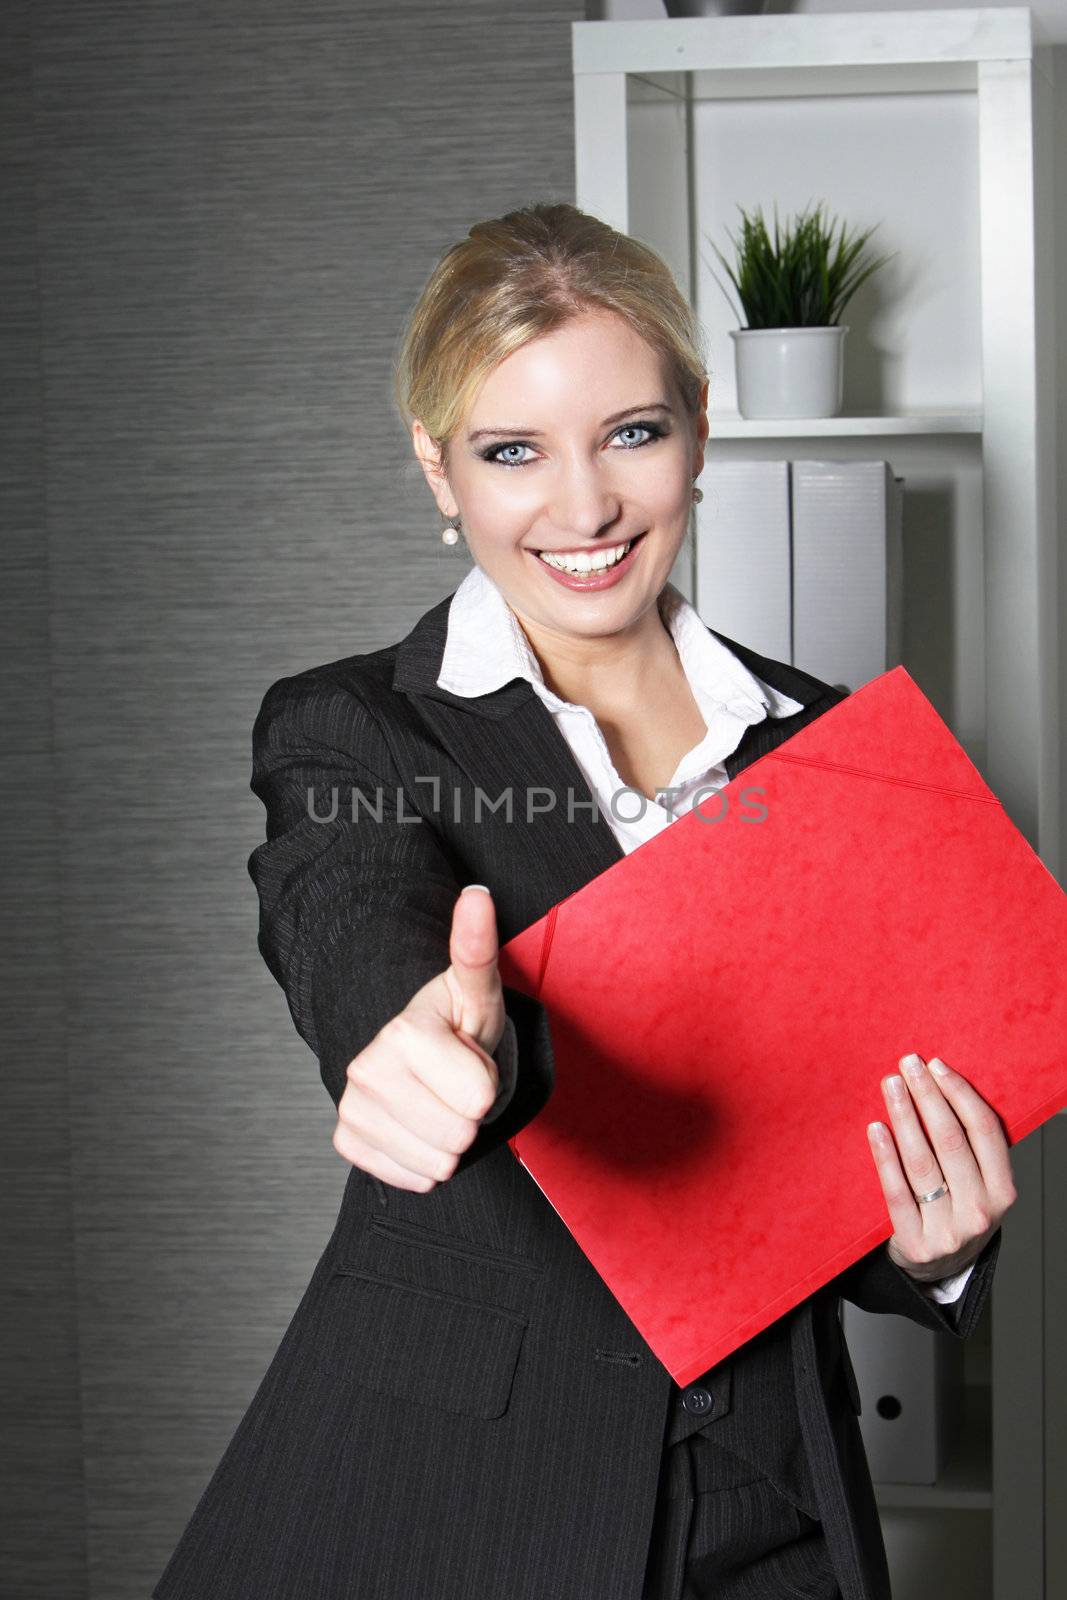 Beautiful office worker giving thumbs up by Farina6000